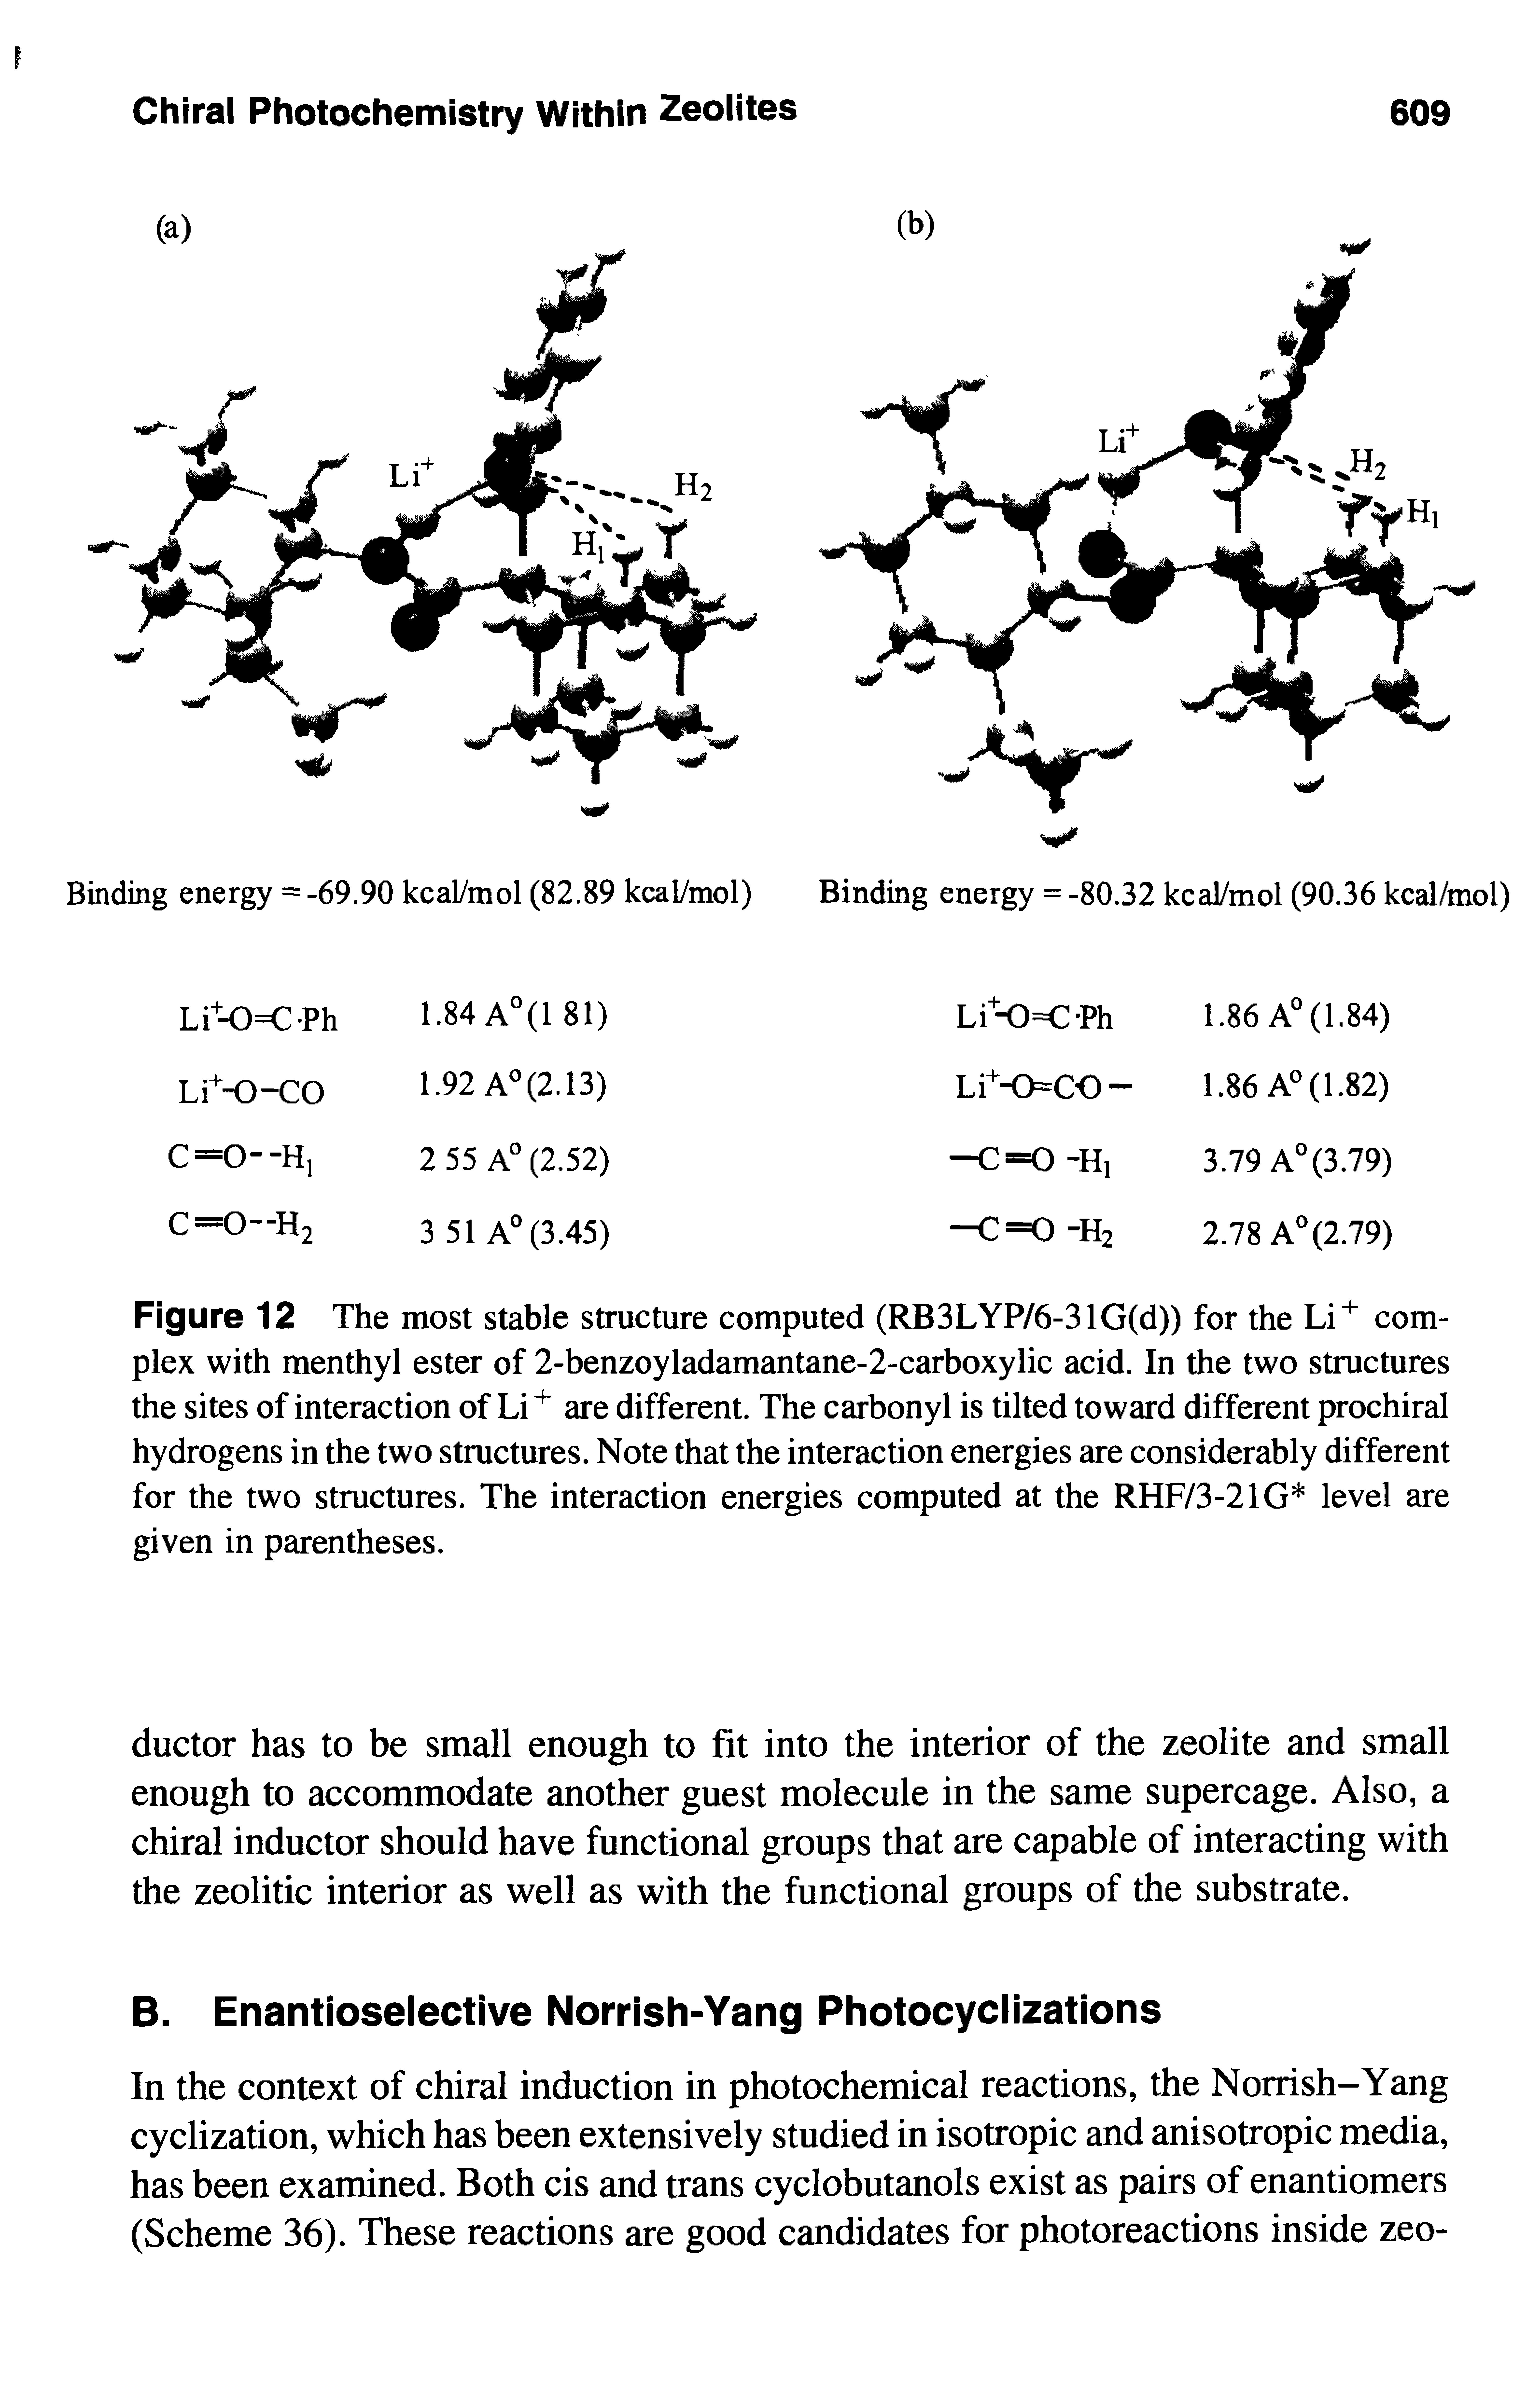 Figure 12 The most stable structure computed (RB3LYP/6-31G(d)) for the Li+ complex with menthyl ester of 2-benzoyladamantane-2-carboxylic acid. In the two structures the sites of interaction of Li+ are different. The carbonyl is tilted toward different prochiral hydrogens in the two structures. Note that the interaction energies are considerably different for the two structures. The interaction energies computed at the RHF/3-21G level are given in parentheses.